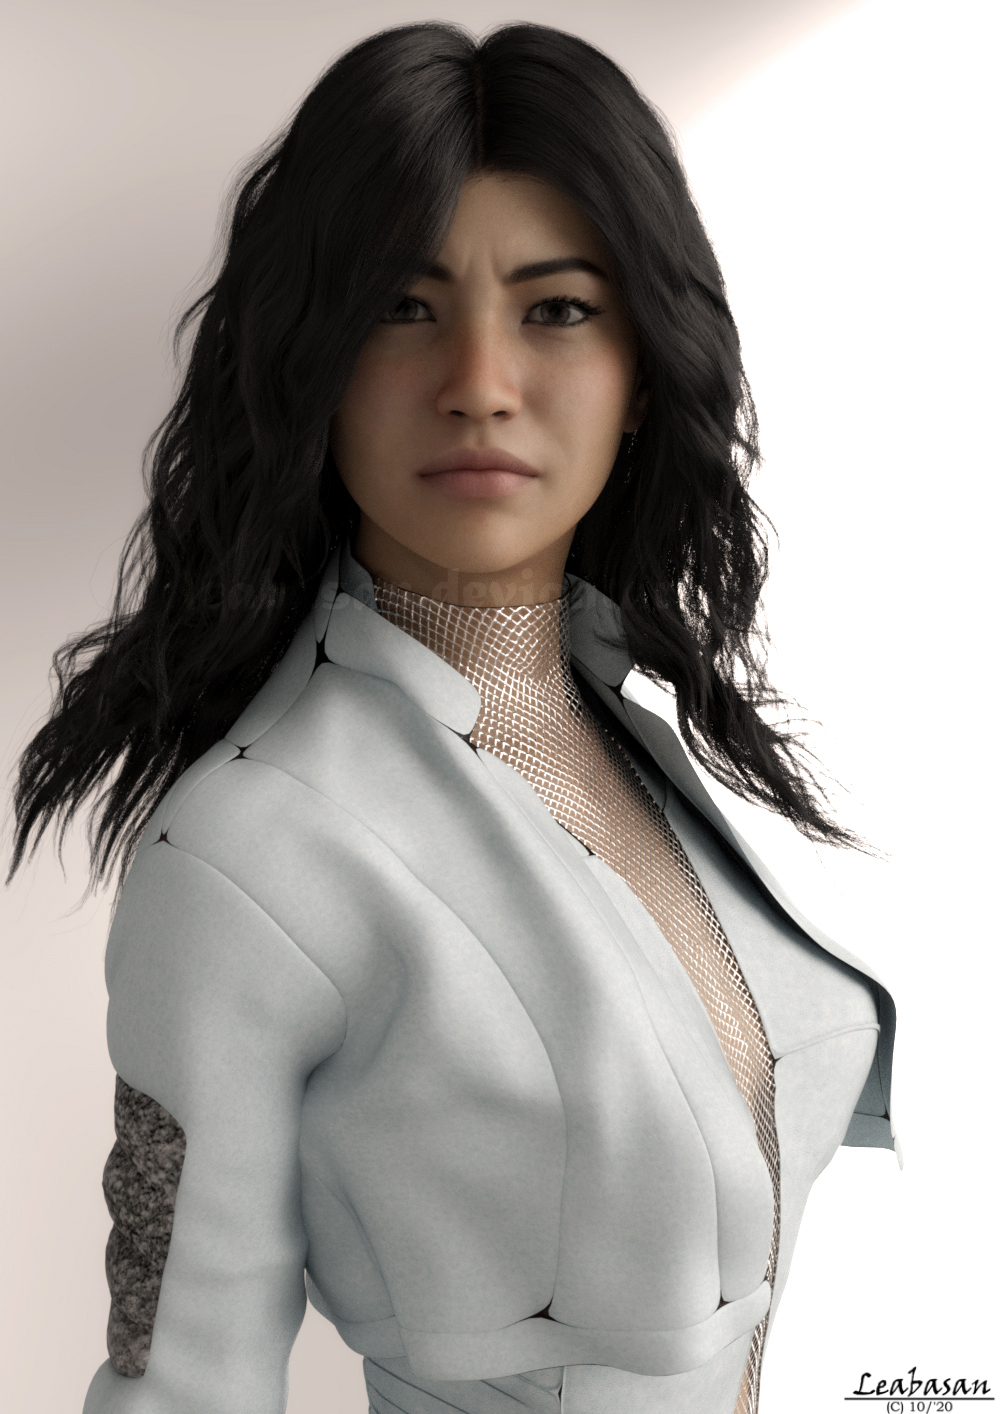 Colleen Wing Porn Pix